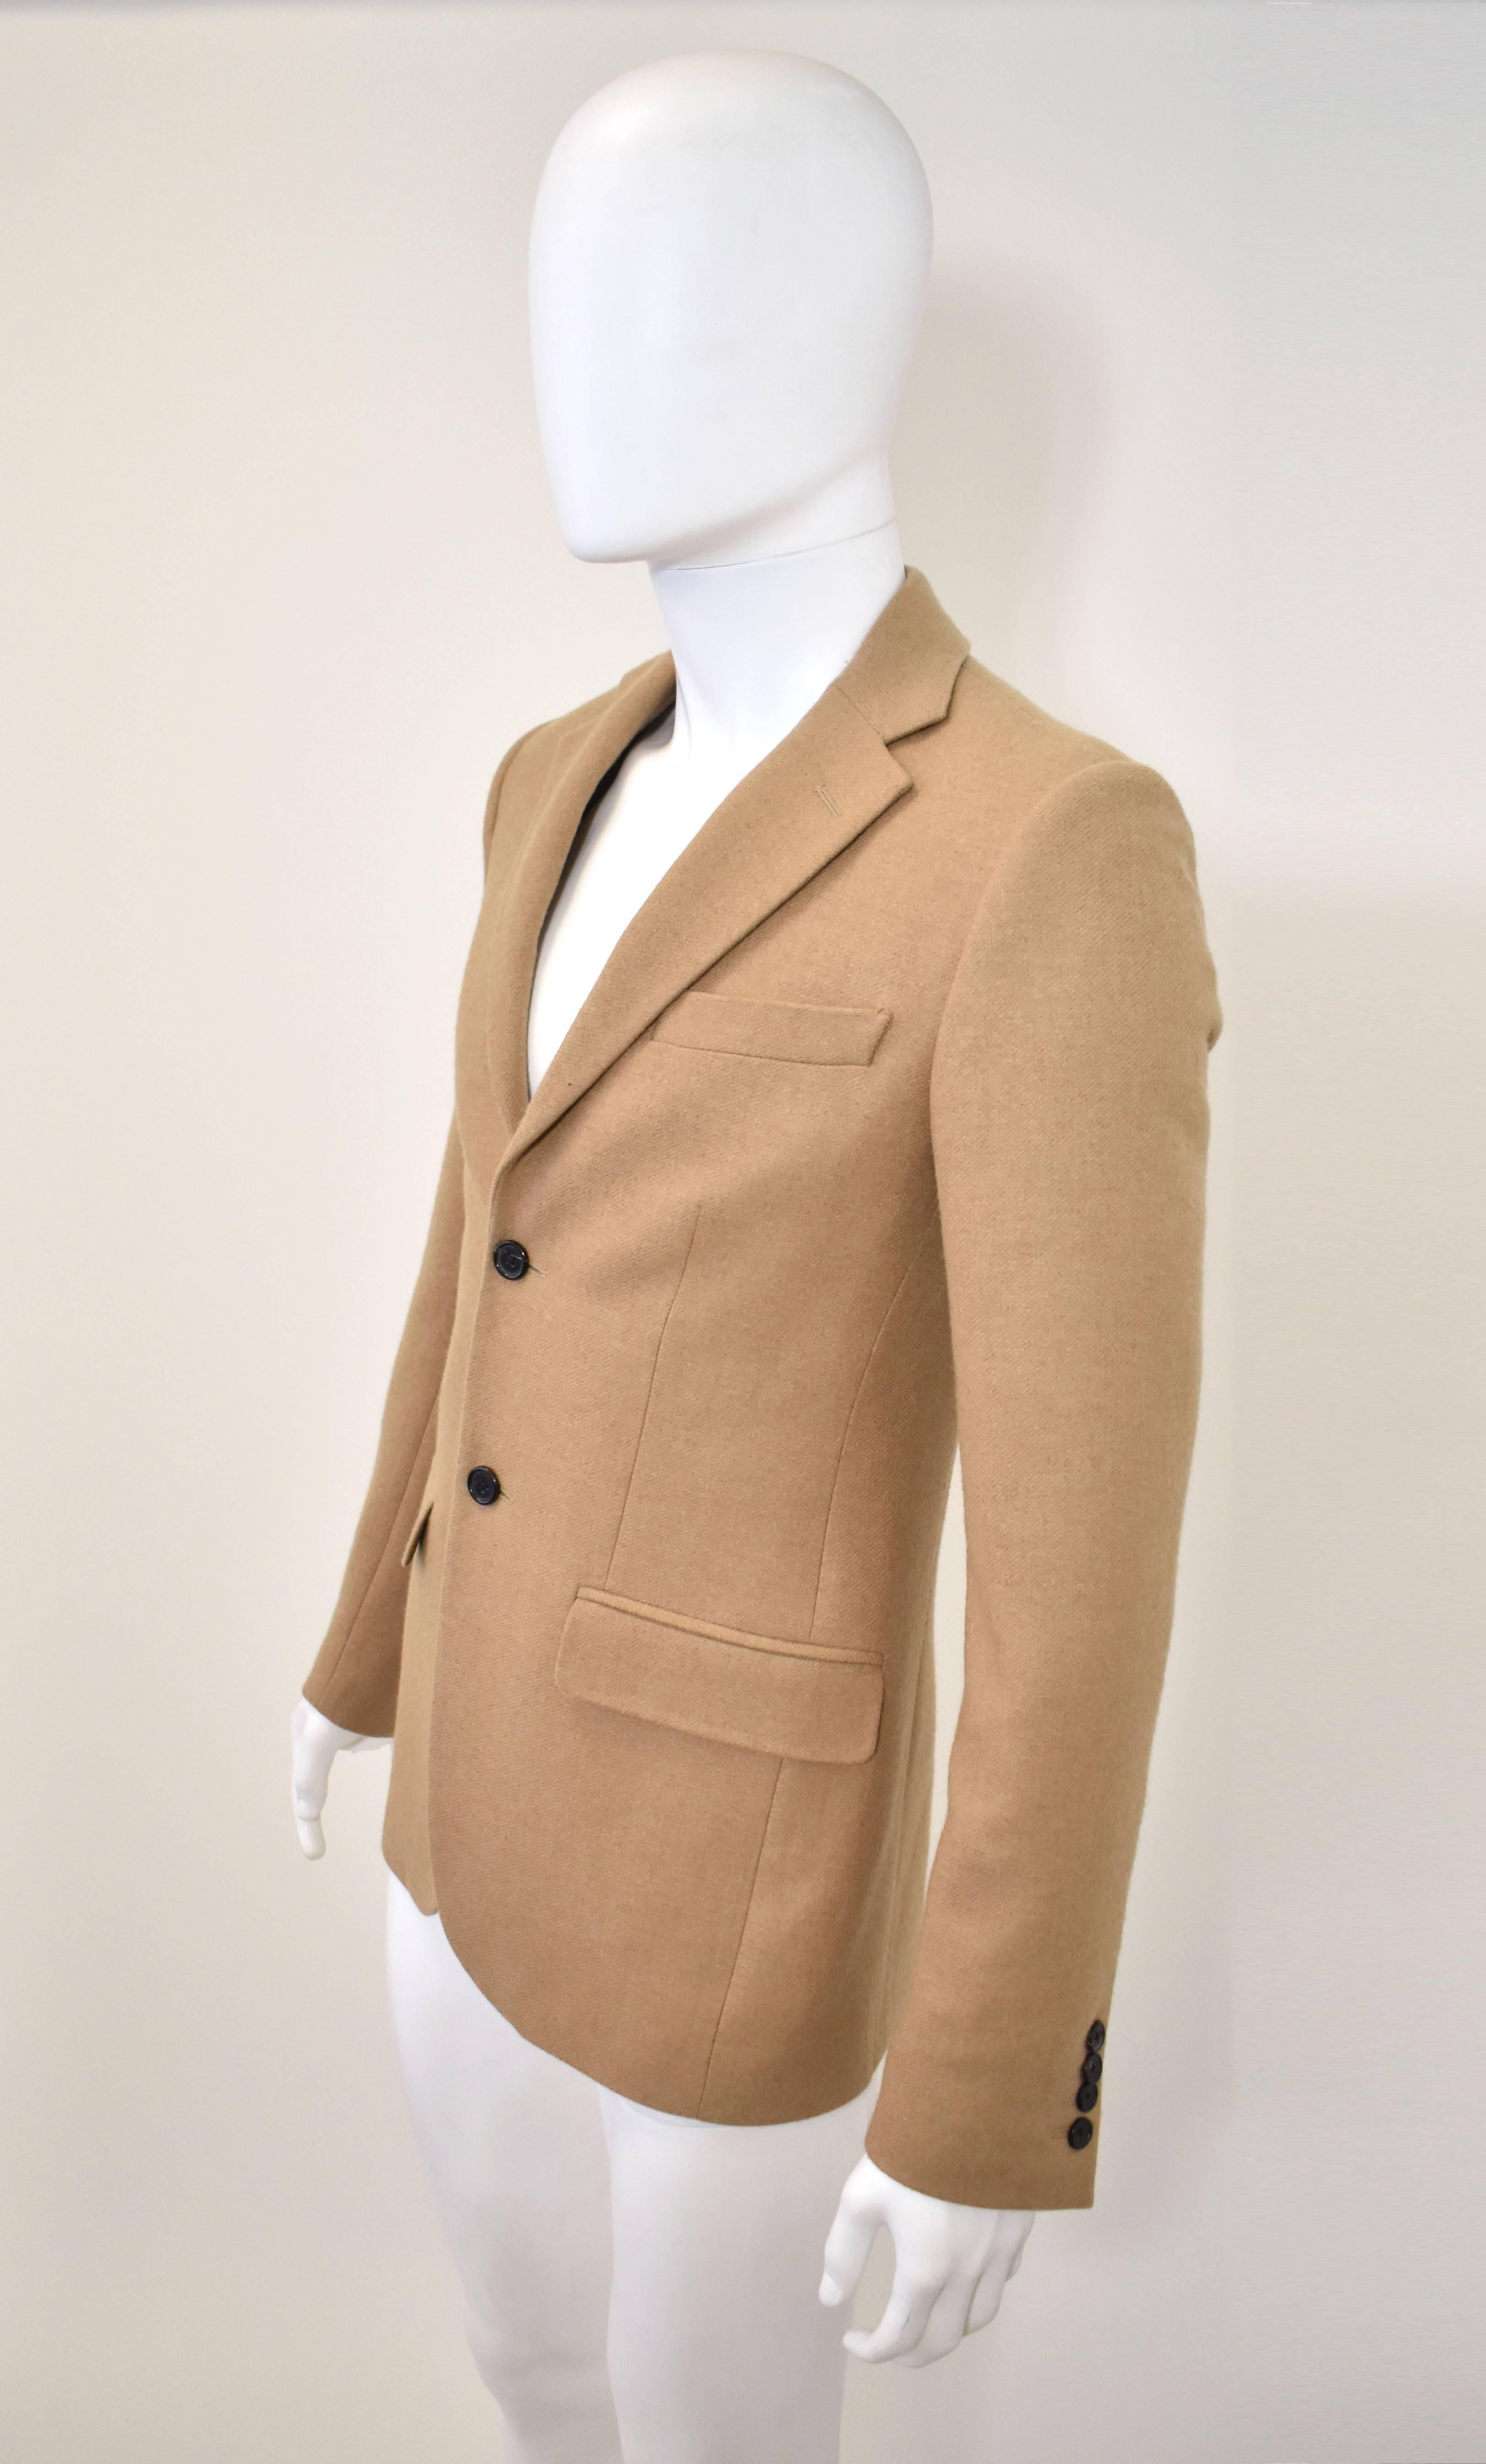 A camel wool fitted blazer by Raf Simons. The piece is brand new – it is in excellent condition. 


Length - 30.5
Bust - 37
Waist - 34
Hips - 38
Sleeve Length - 26.5